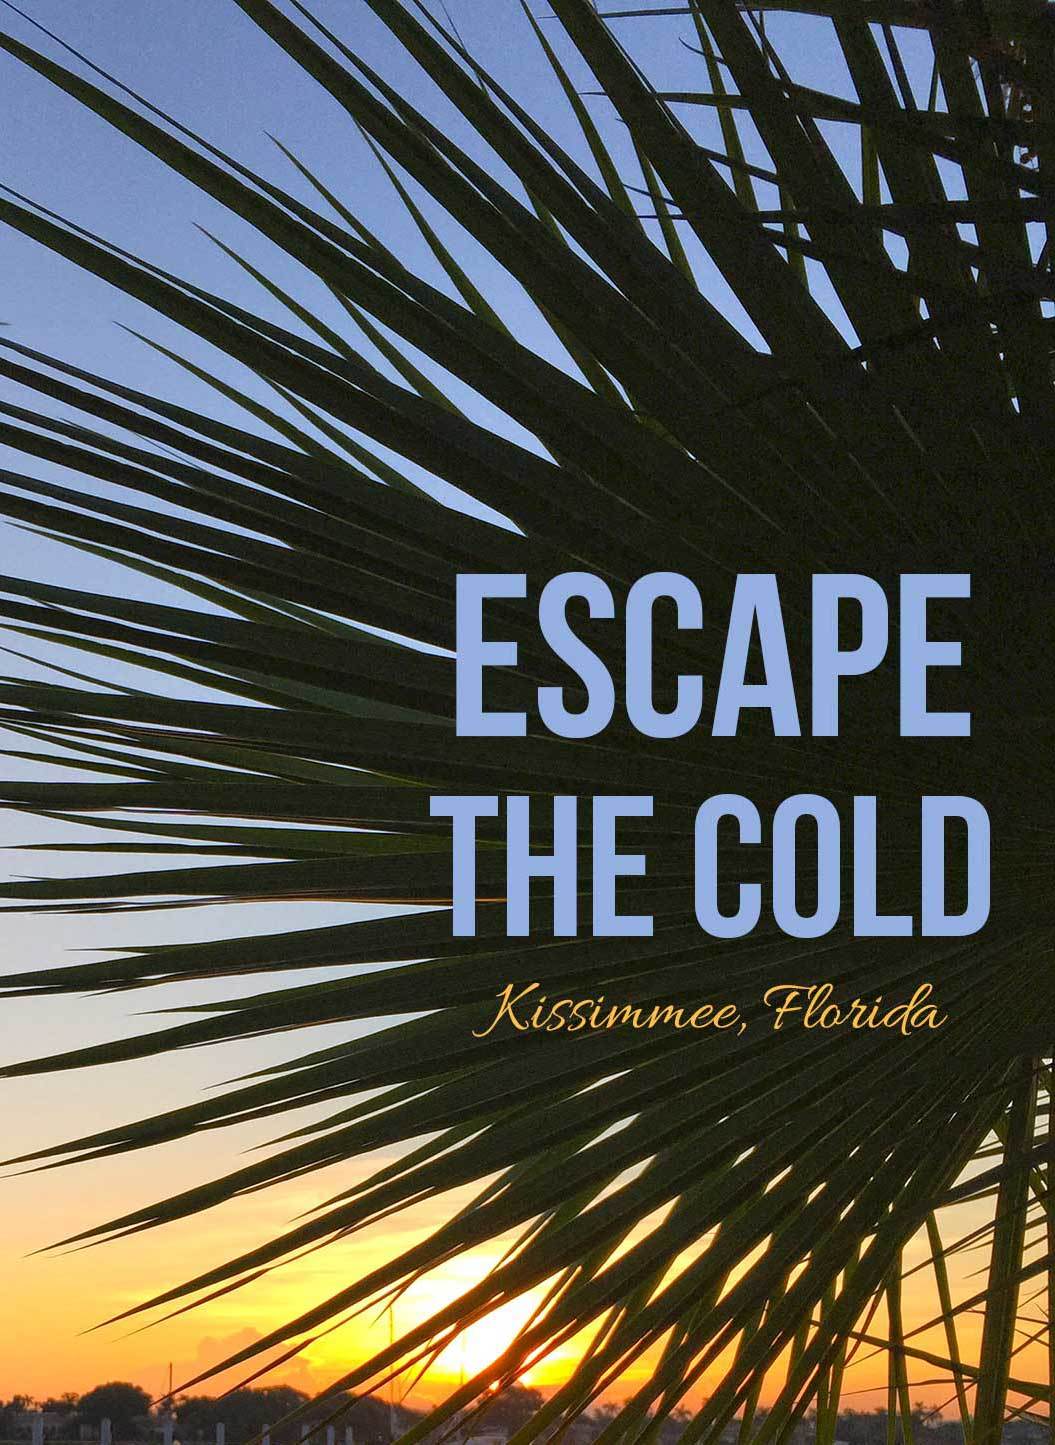 Escape the cold - head to Kissimmee, Florida and enter to win a free trip at https://ooh.li/44422ce